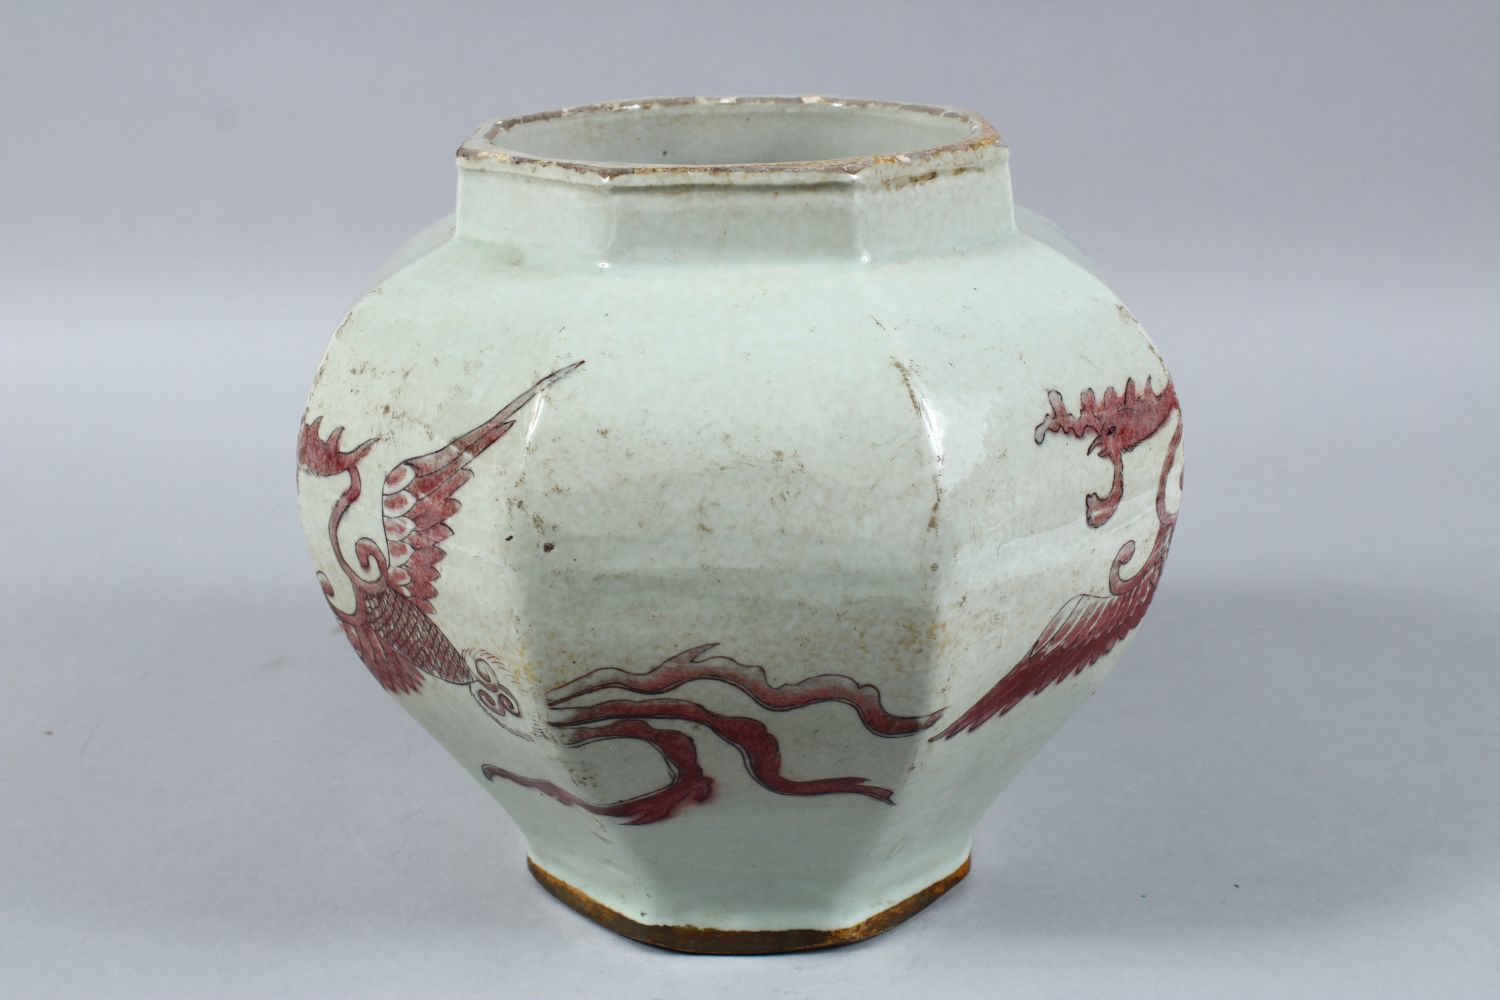 A CHINESE IRON RED DECORATED OCTAGONAL PORCELAIN JAR, the body of the jar decorated in iron red to - Image 2 of 8